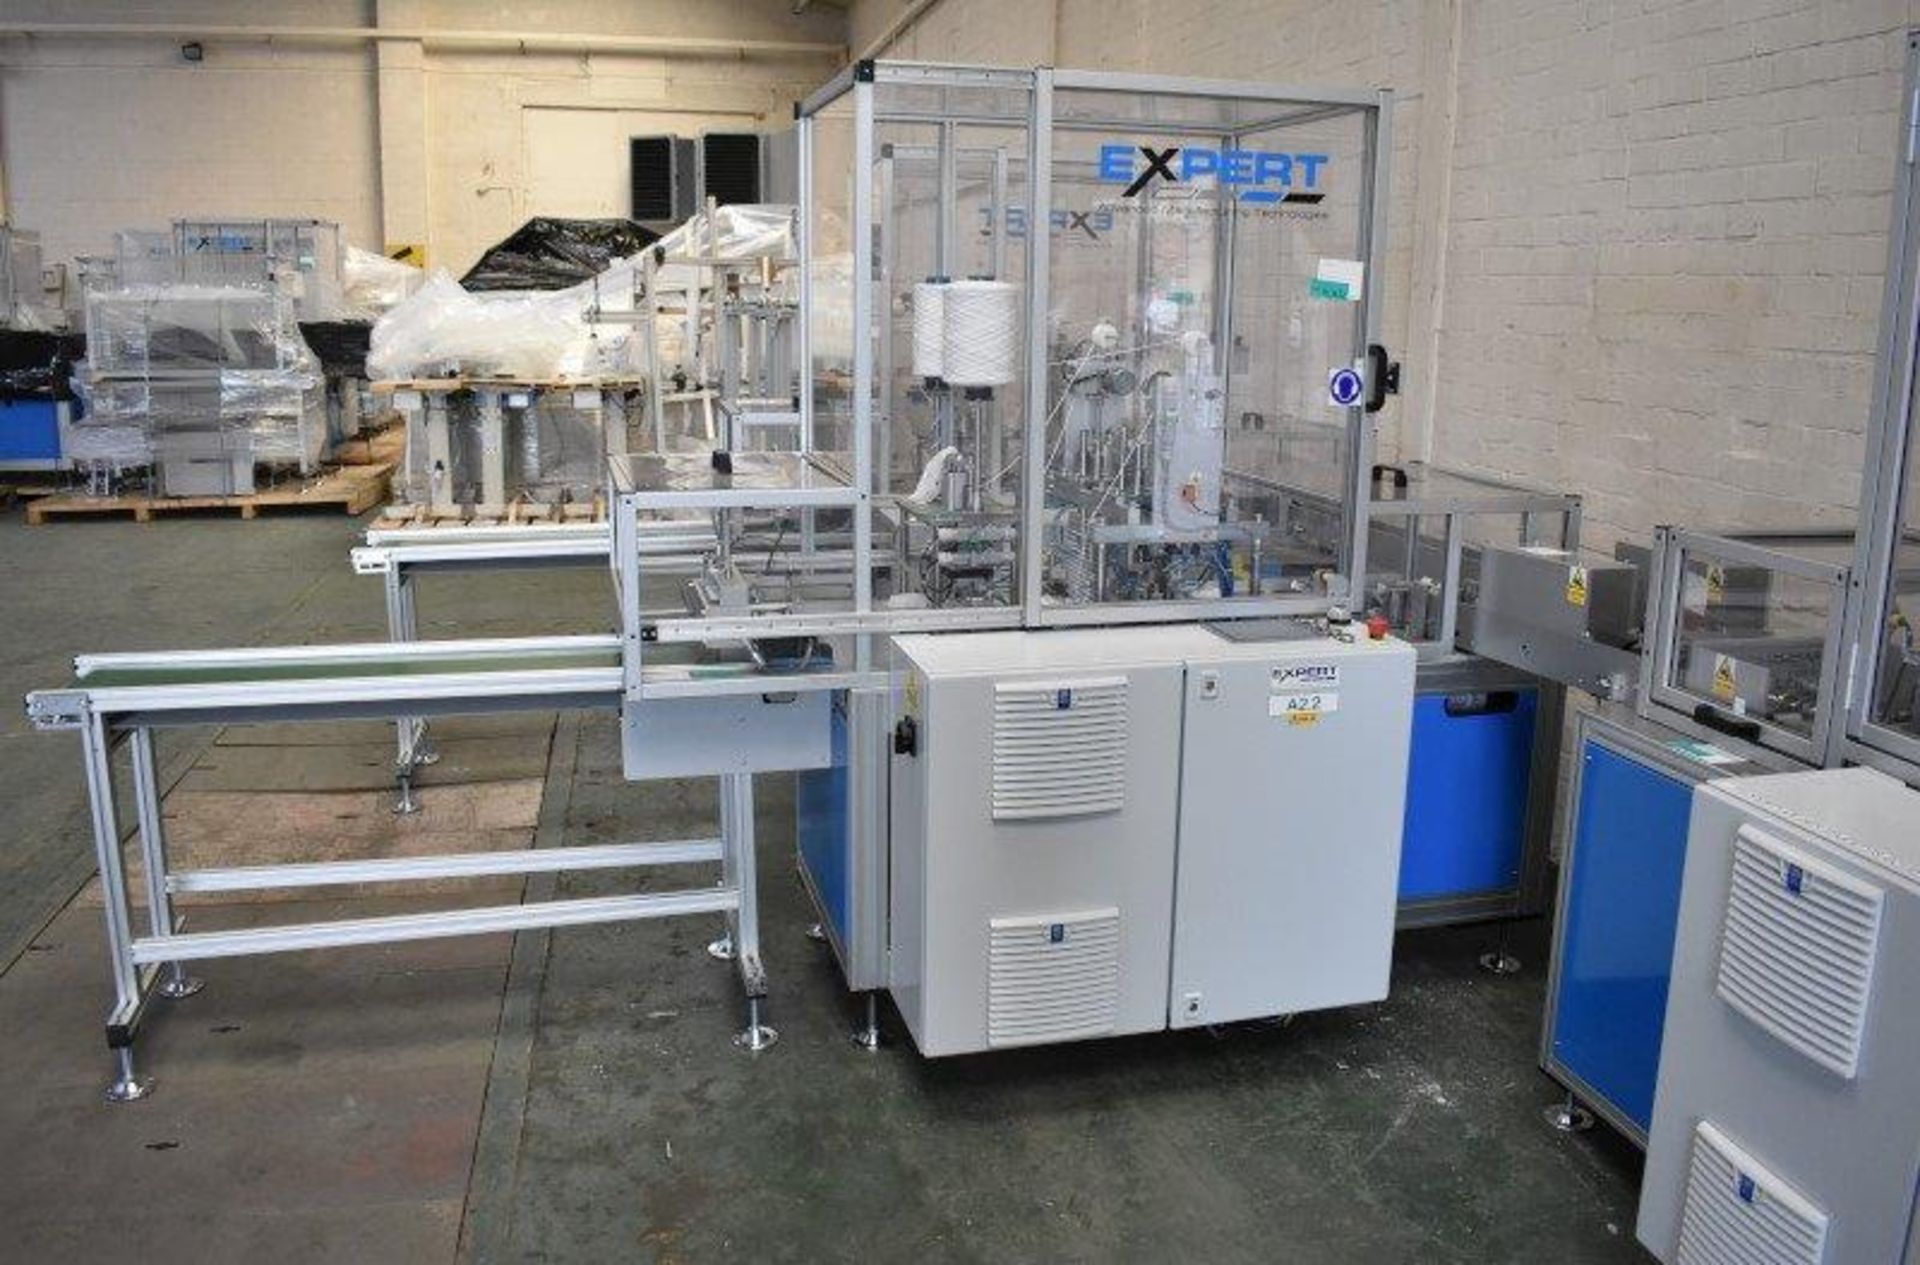 Expert fully automated Mask Making Machine - manufactured in 2020 - Image 6 of 21